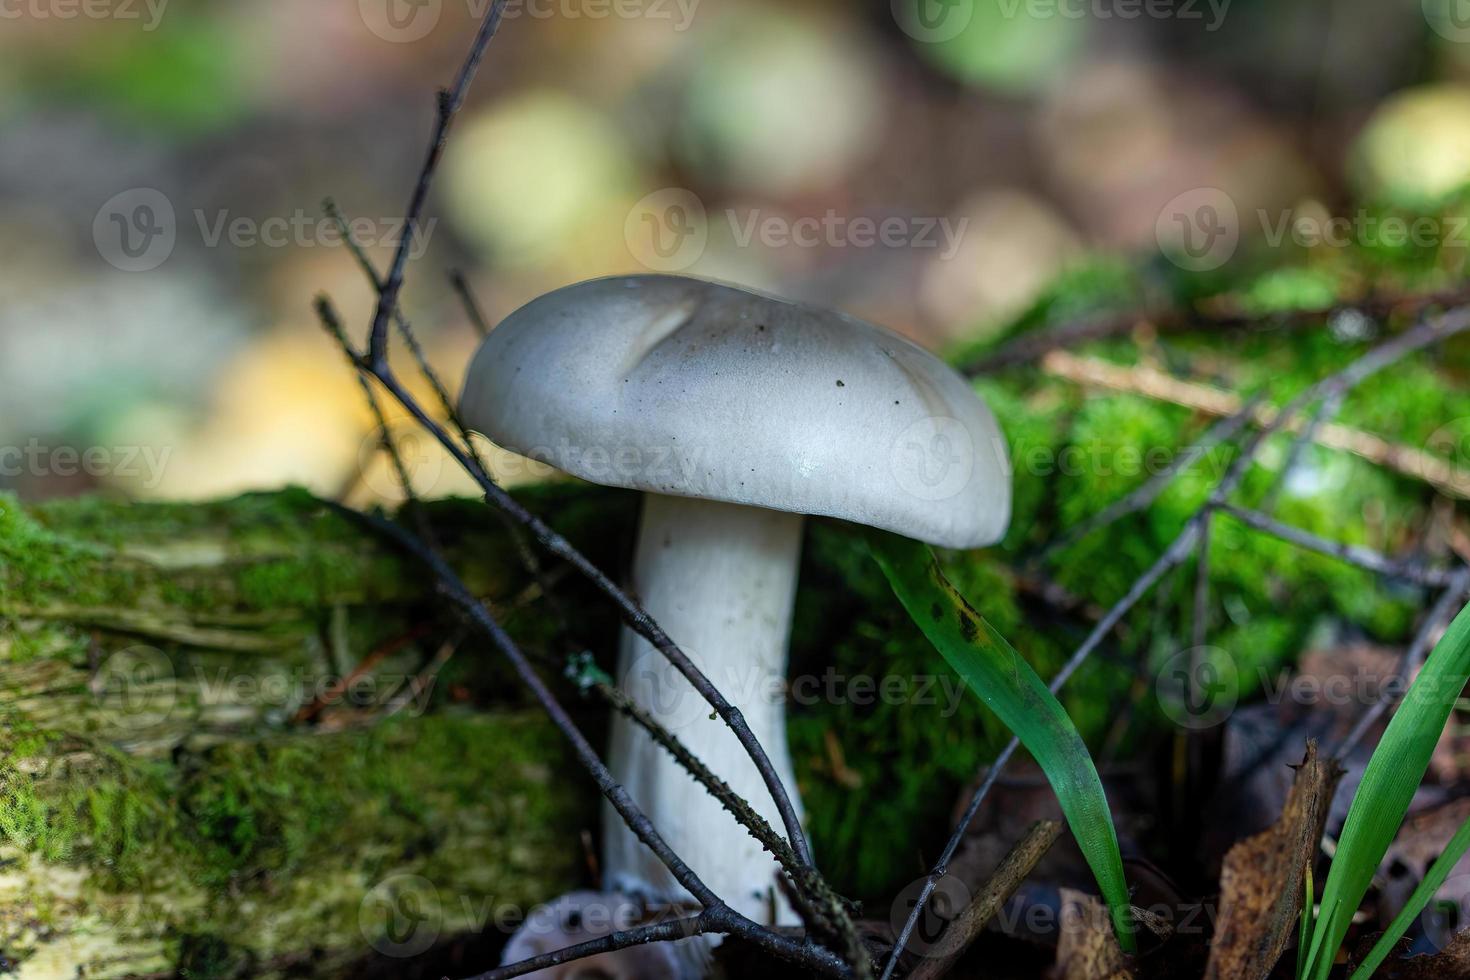 Boletus mushroom in the forest close-up photo